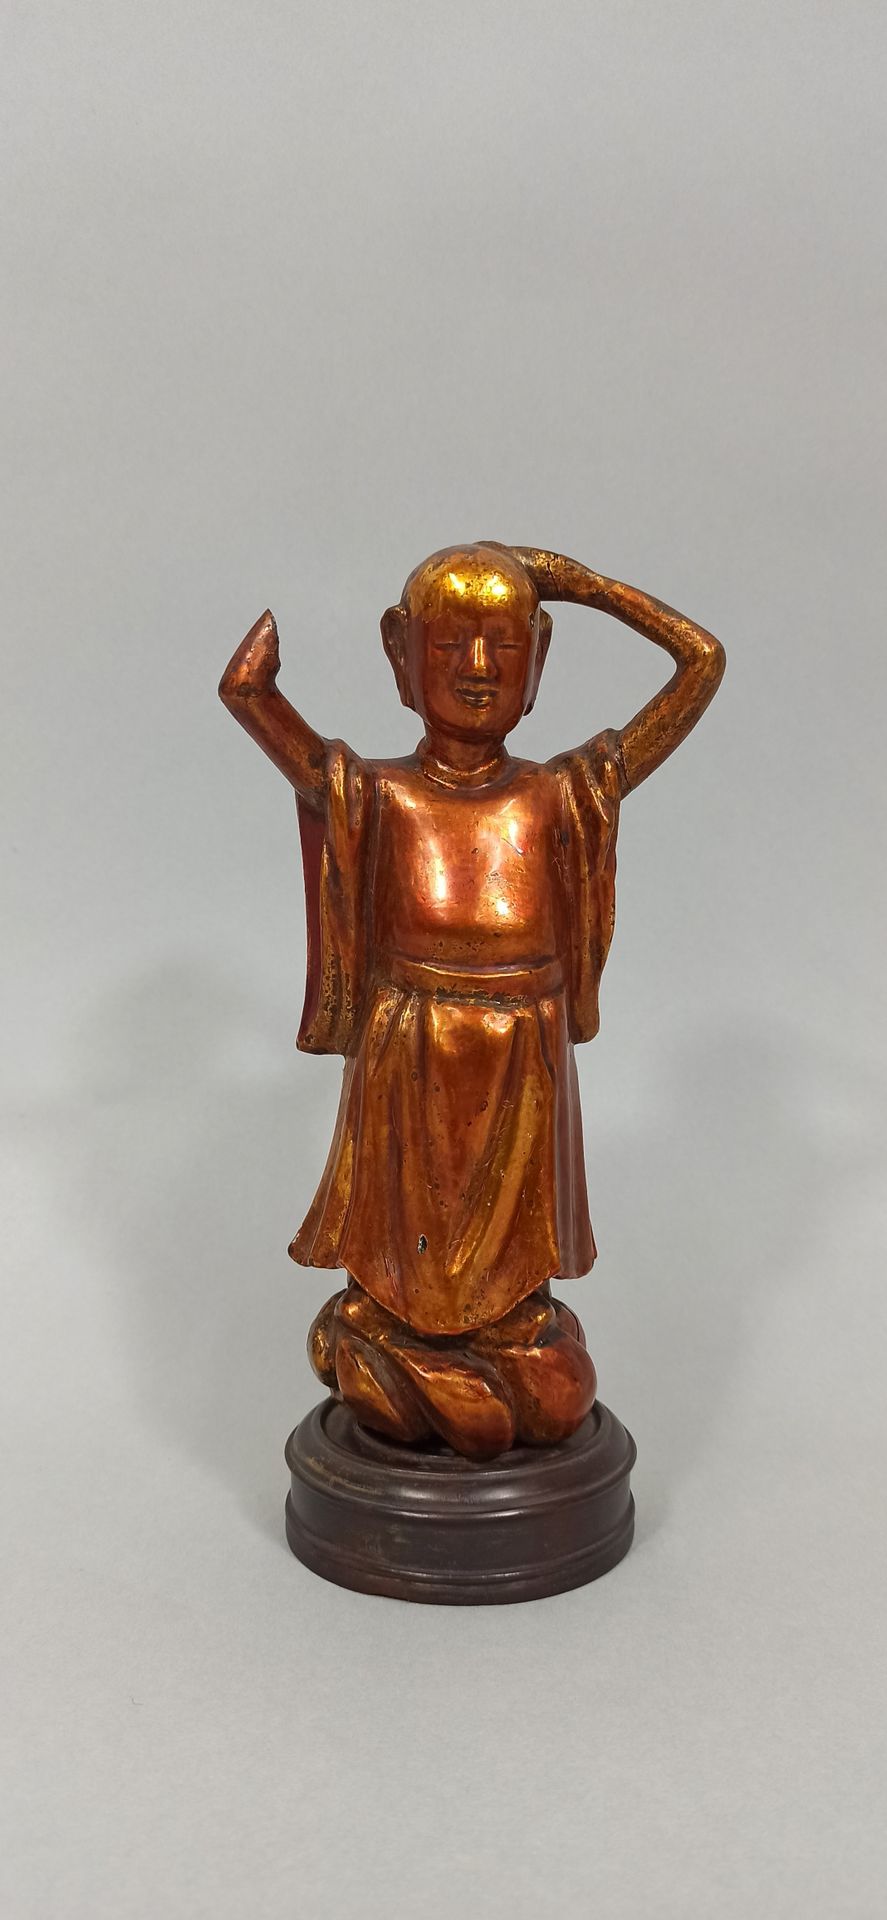 Null CHINA - Circa 1900

A gold lacquered wooden statuette representing a young &hellip;